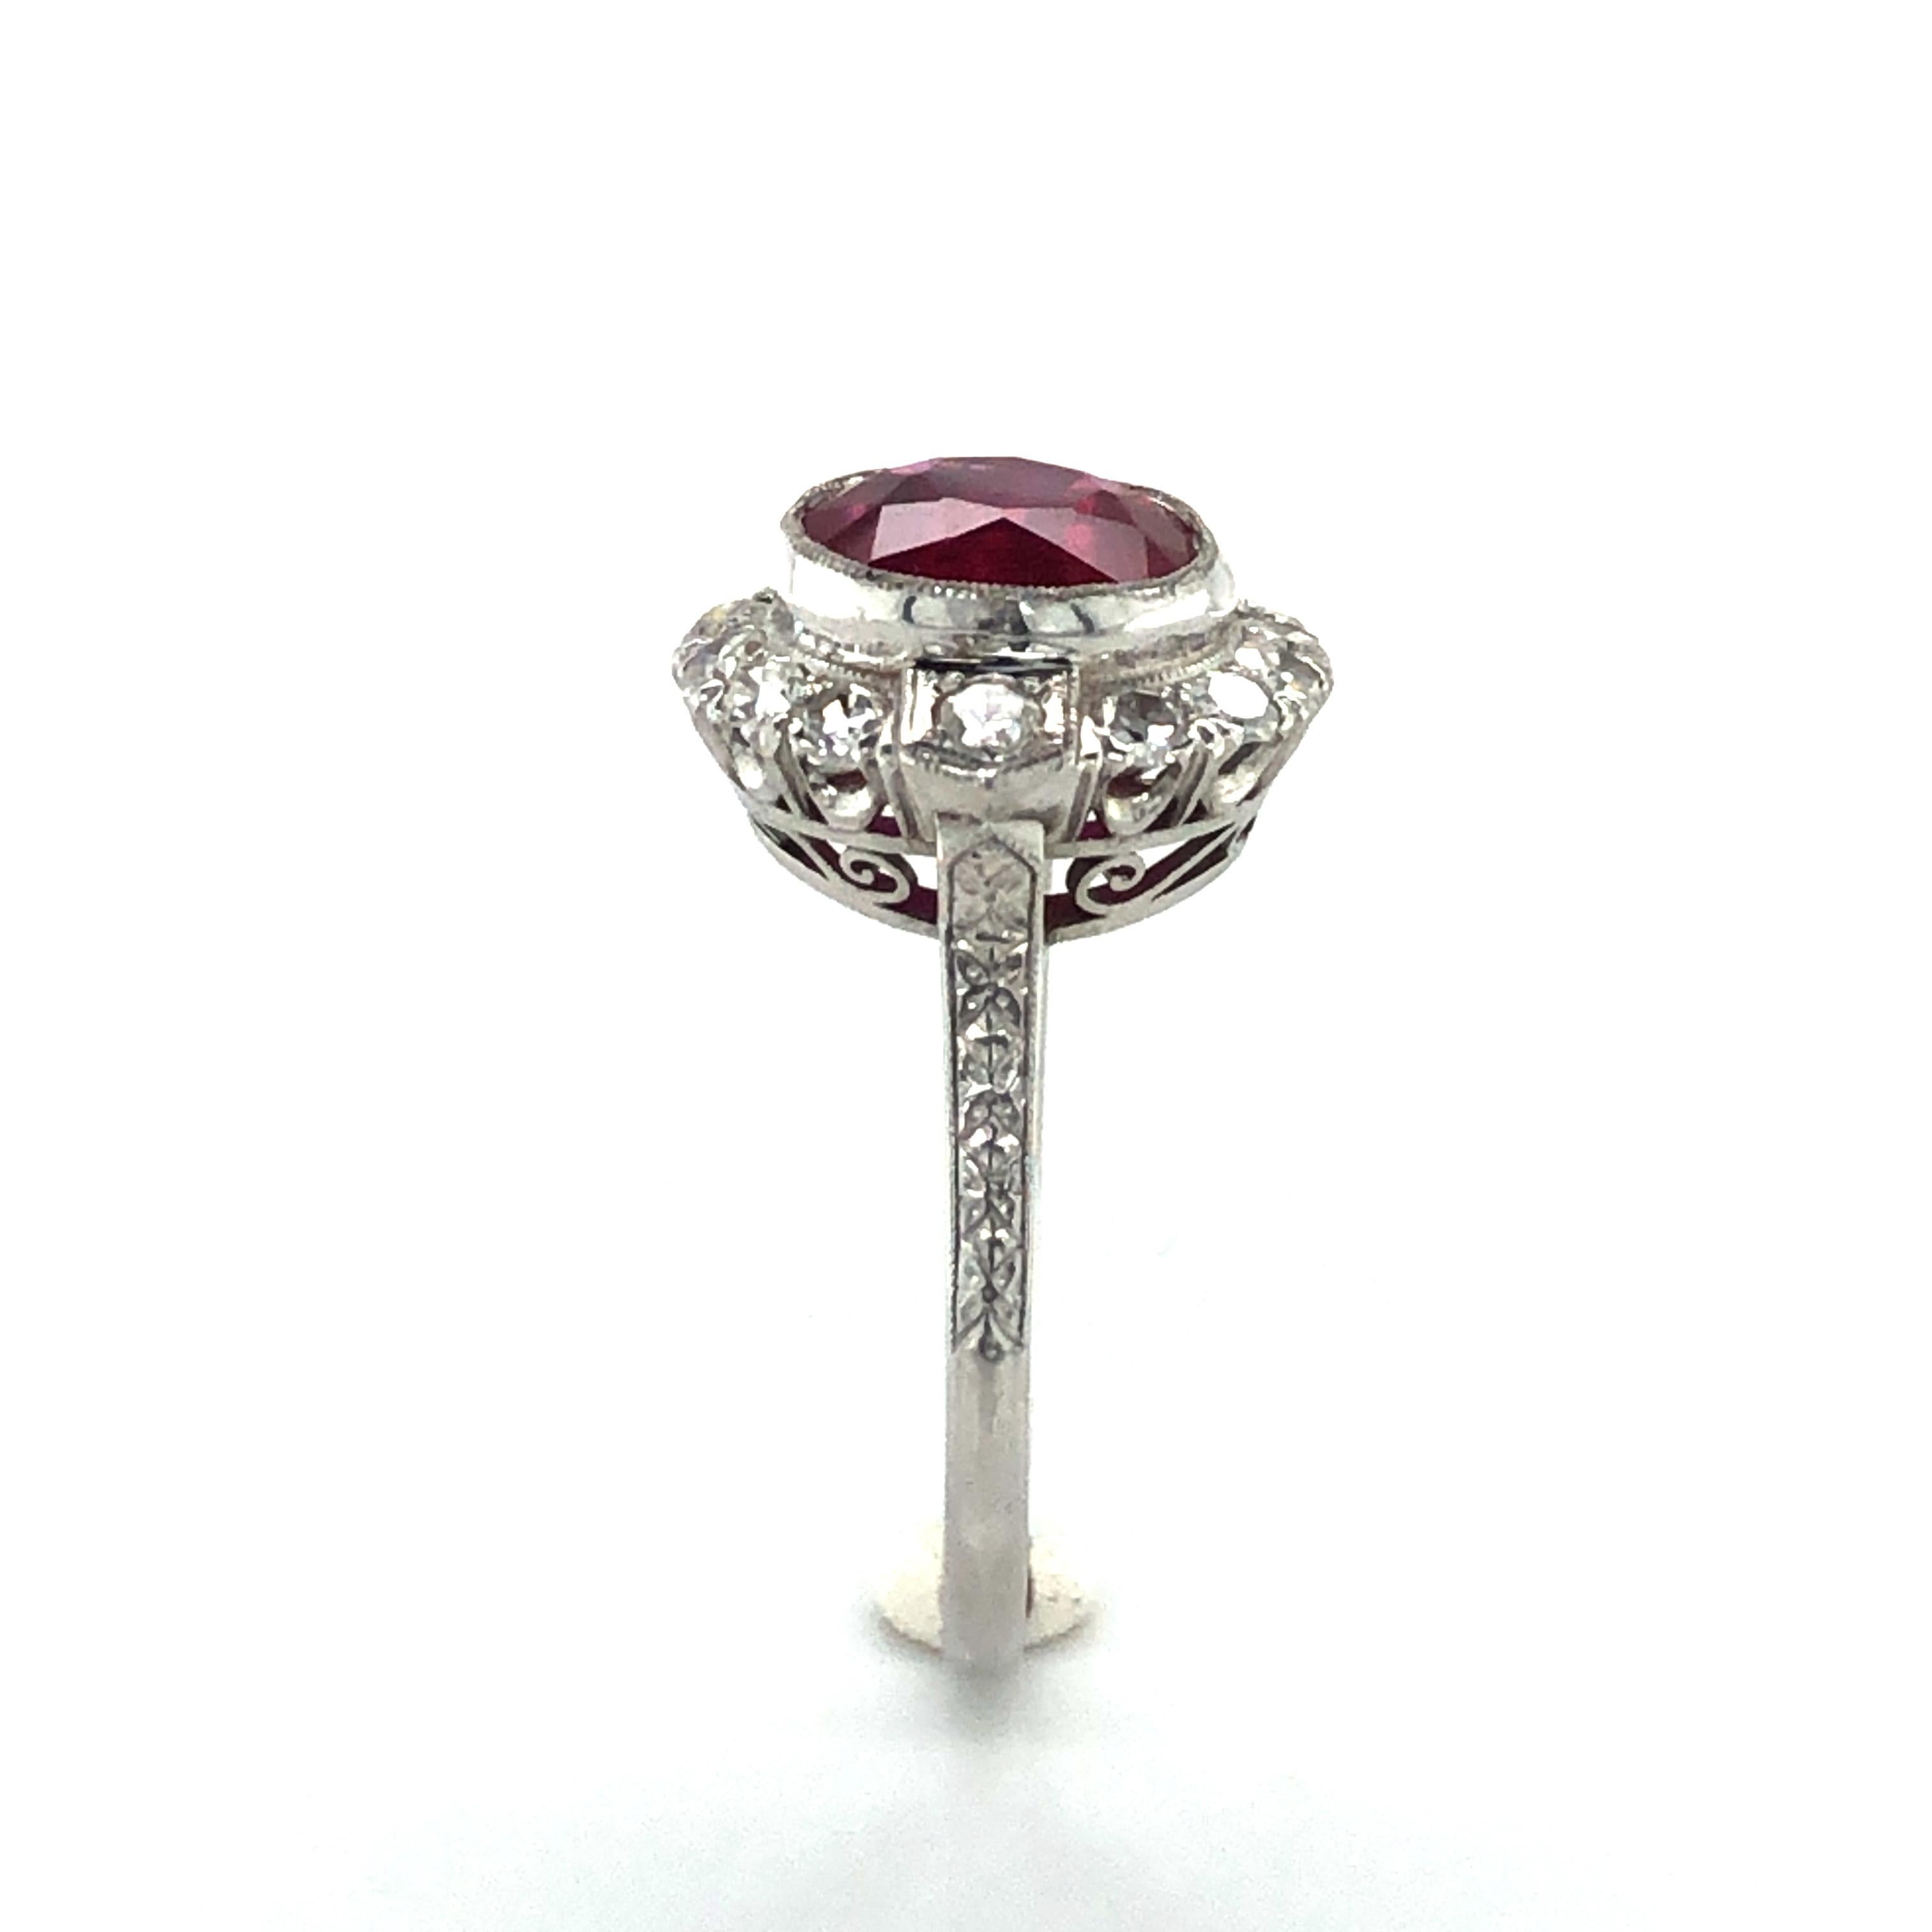 Fabulous Art Deco Ring with Burmese Ruby and Diamonds in Platinum 950 3